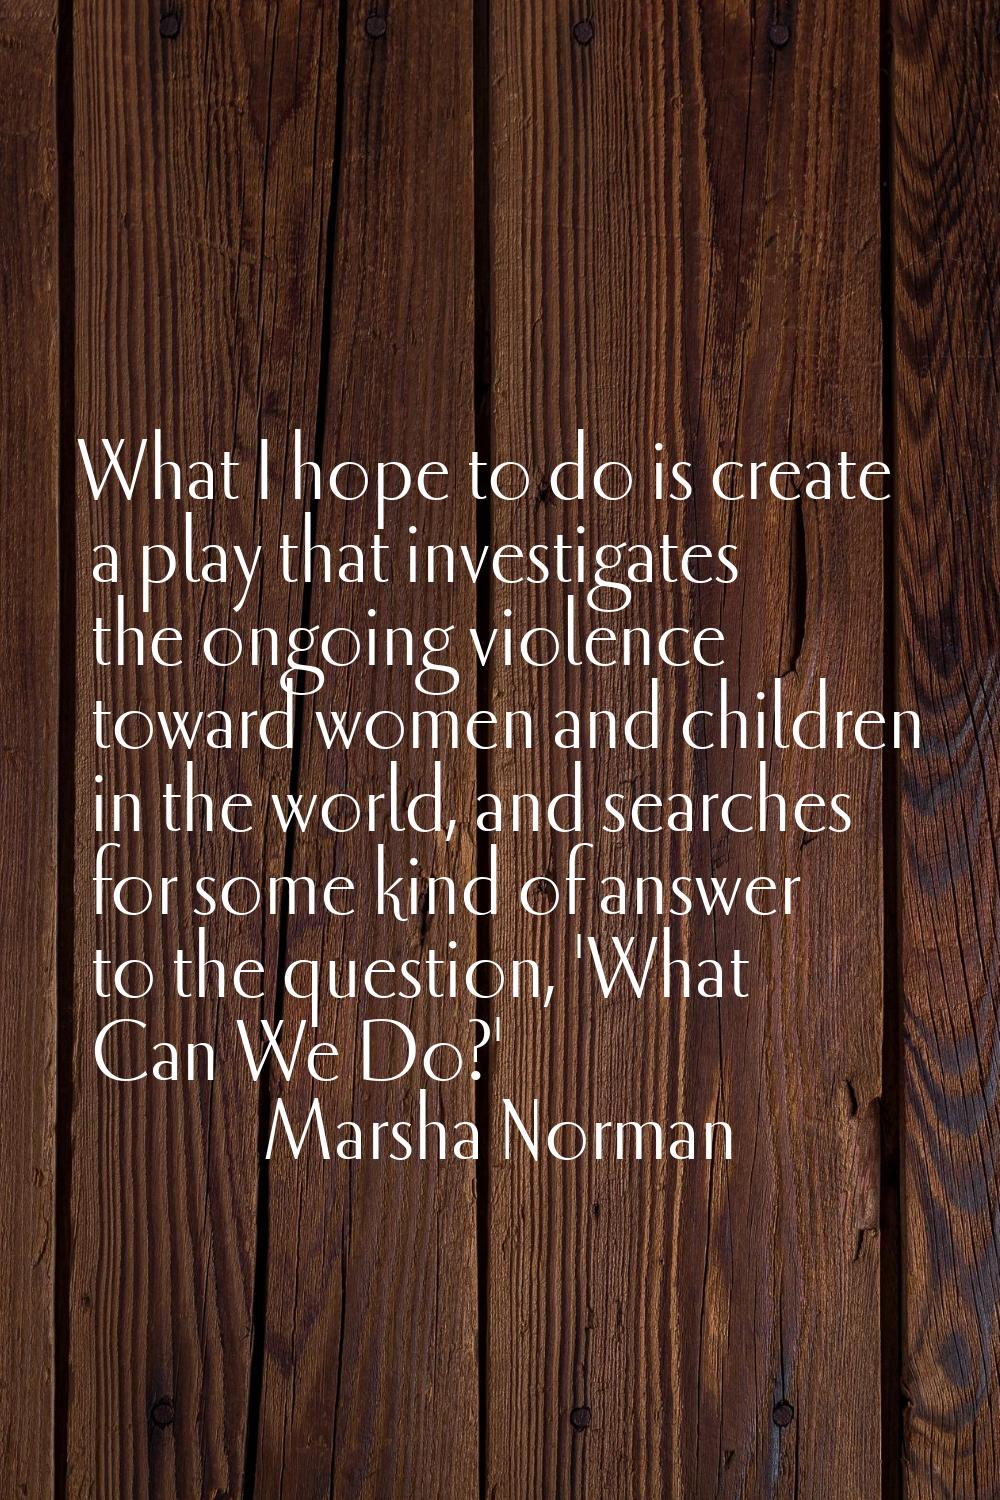 What I hope to do is create a play that investigates the ongoing violence toward women and children